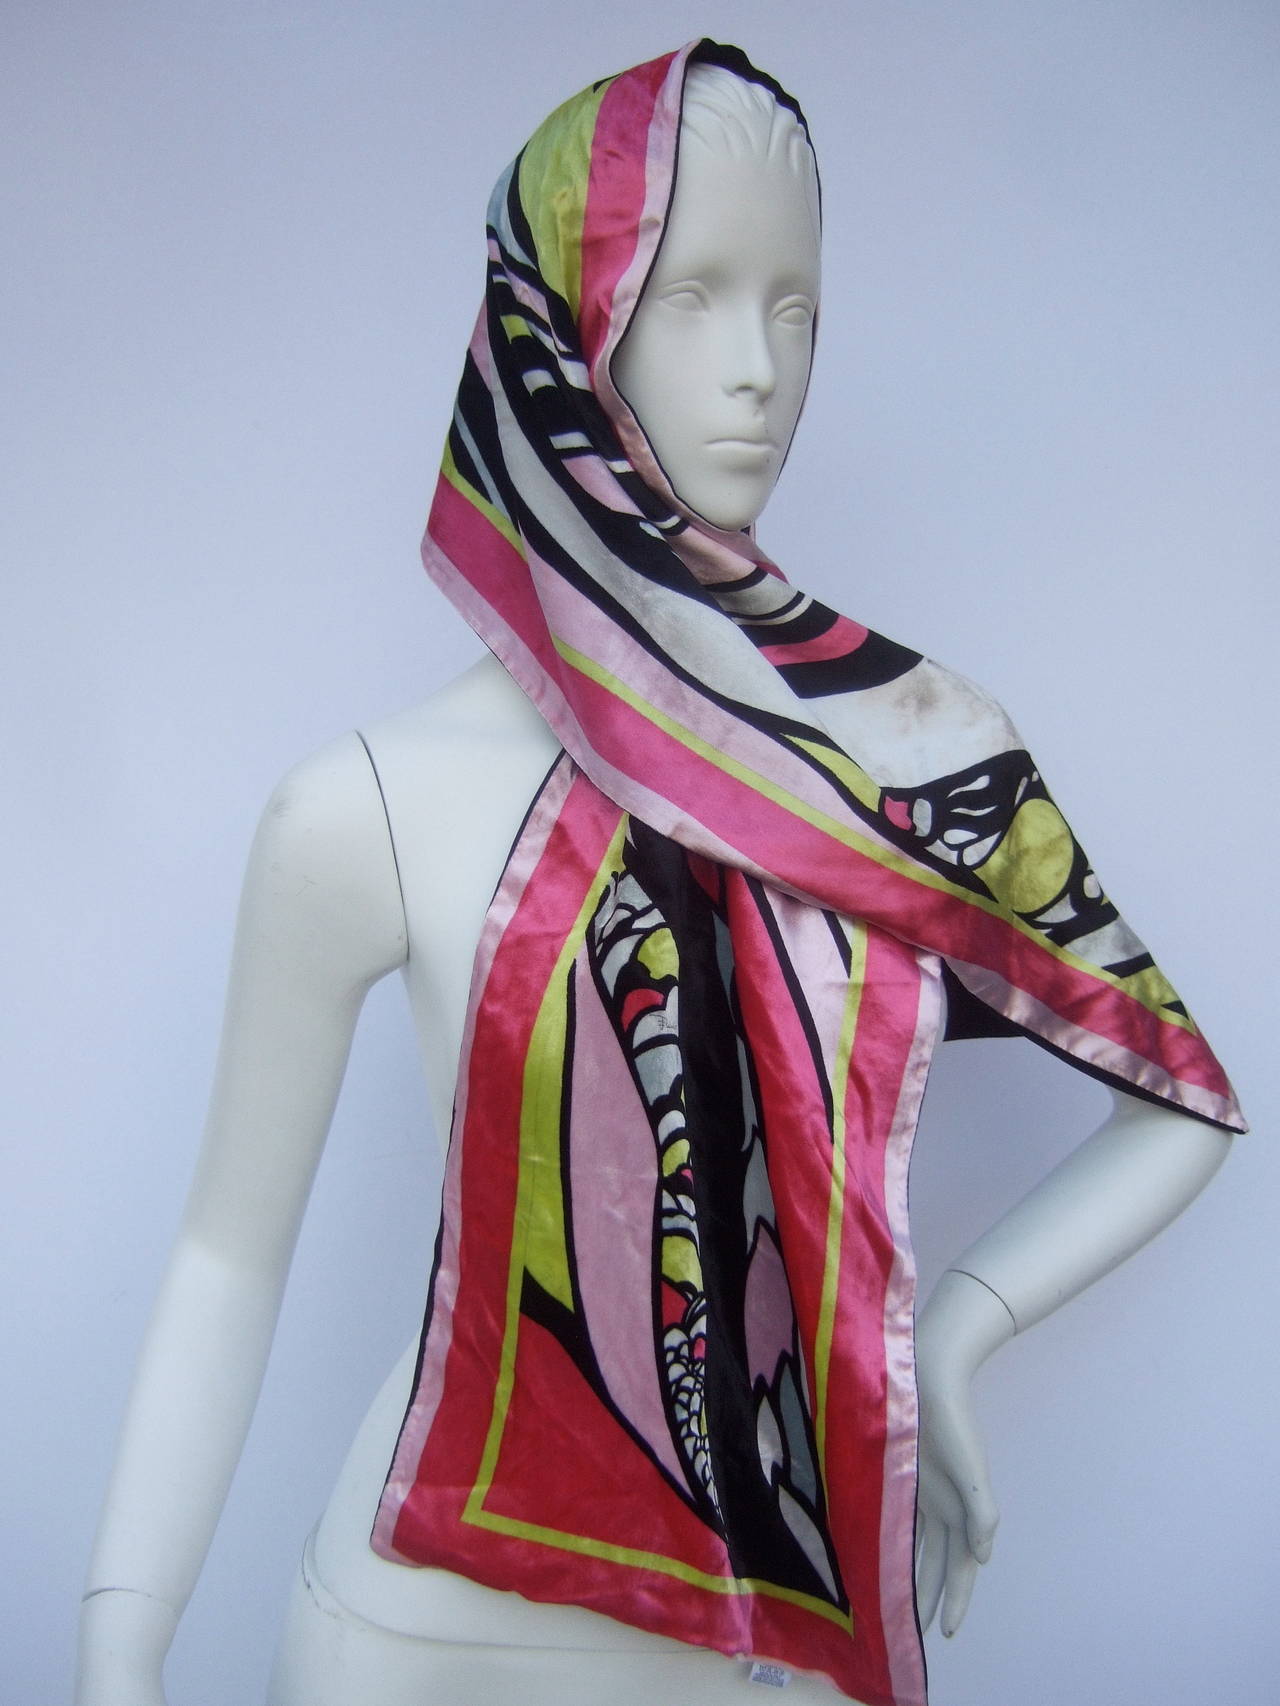 Emilio Pucci Luxurious velvet print oblong scarf Made in Italy
The chic Italian scarf is designed with a collage of bold graphics
The vibrant graphics range from fuchsia pink, pale pink, ice blue, lime green black & white  

The vivid bold